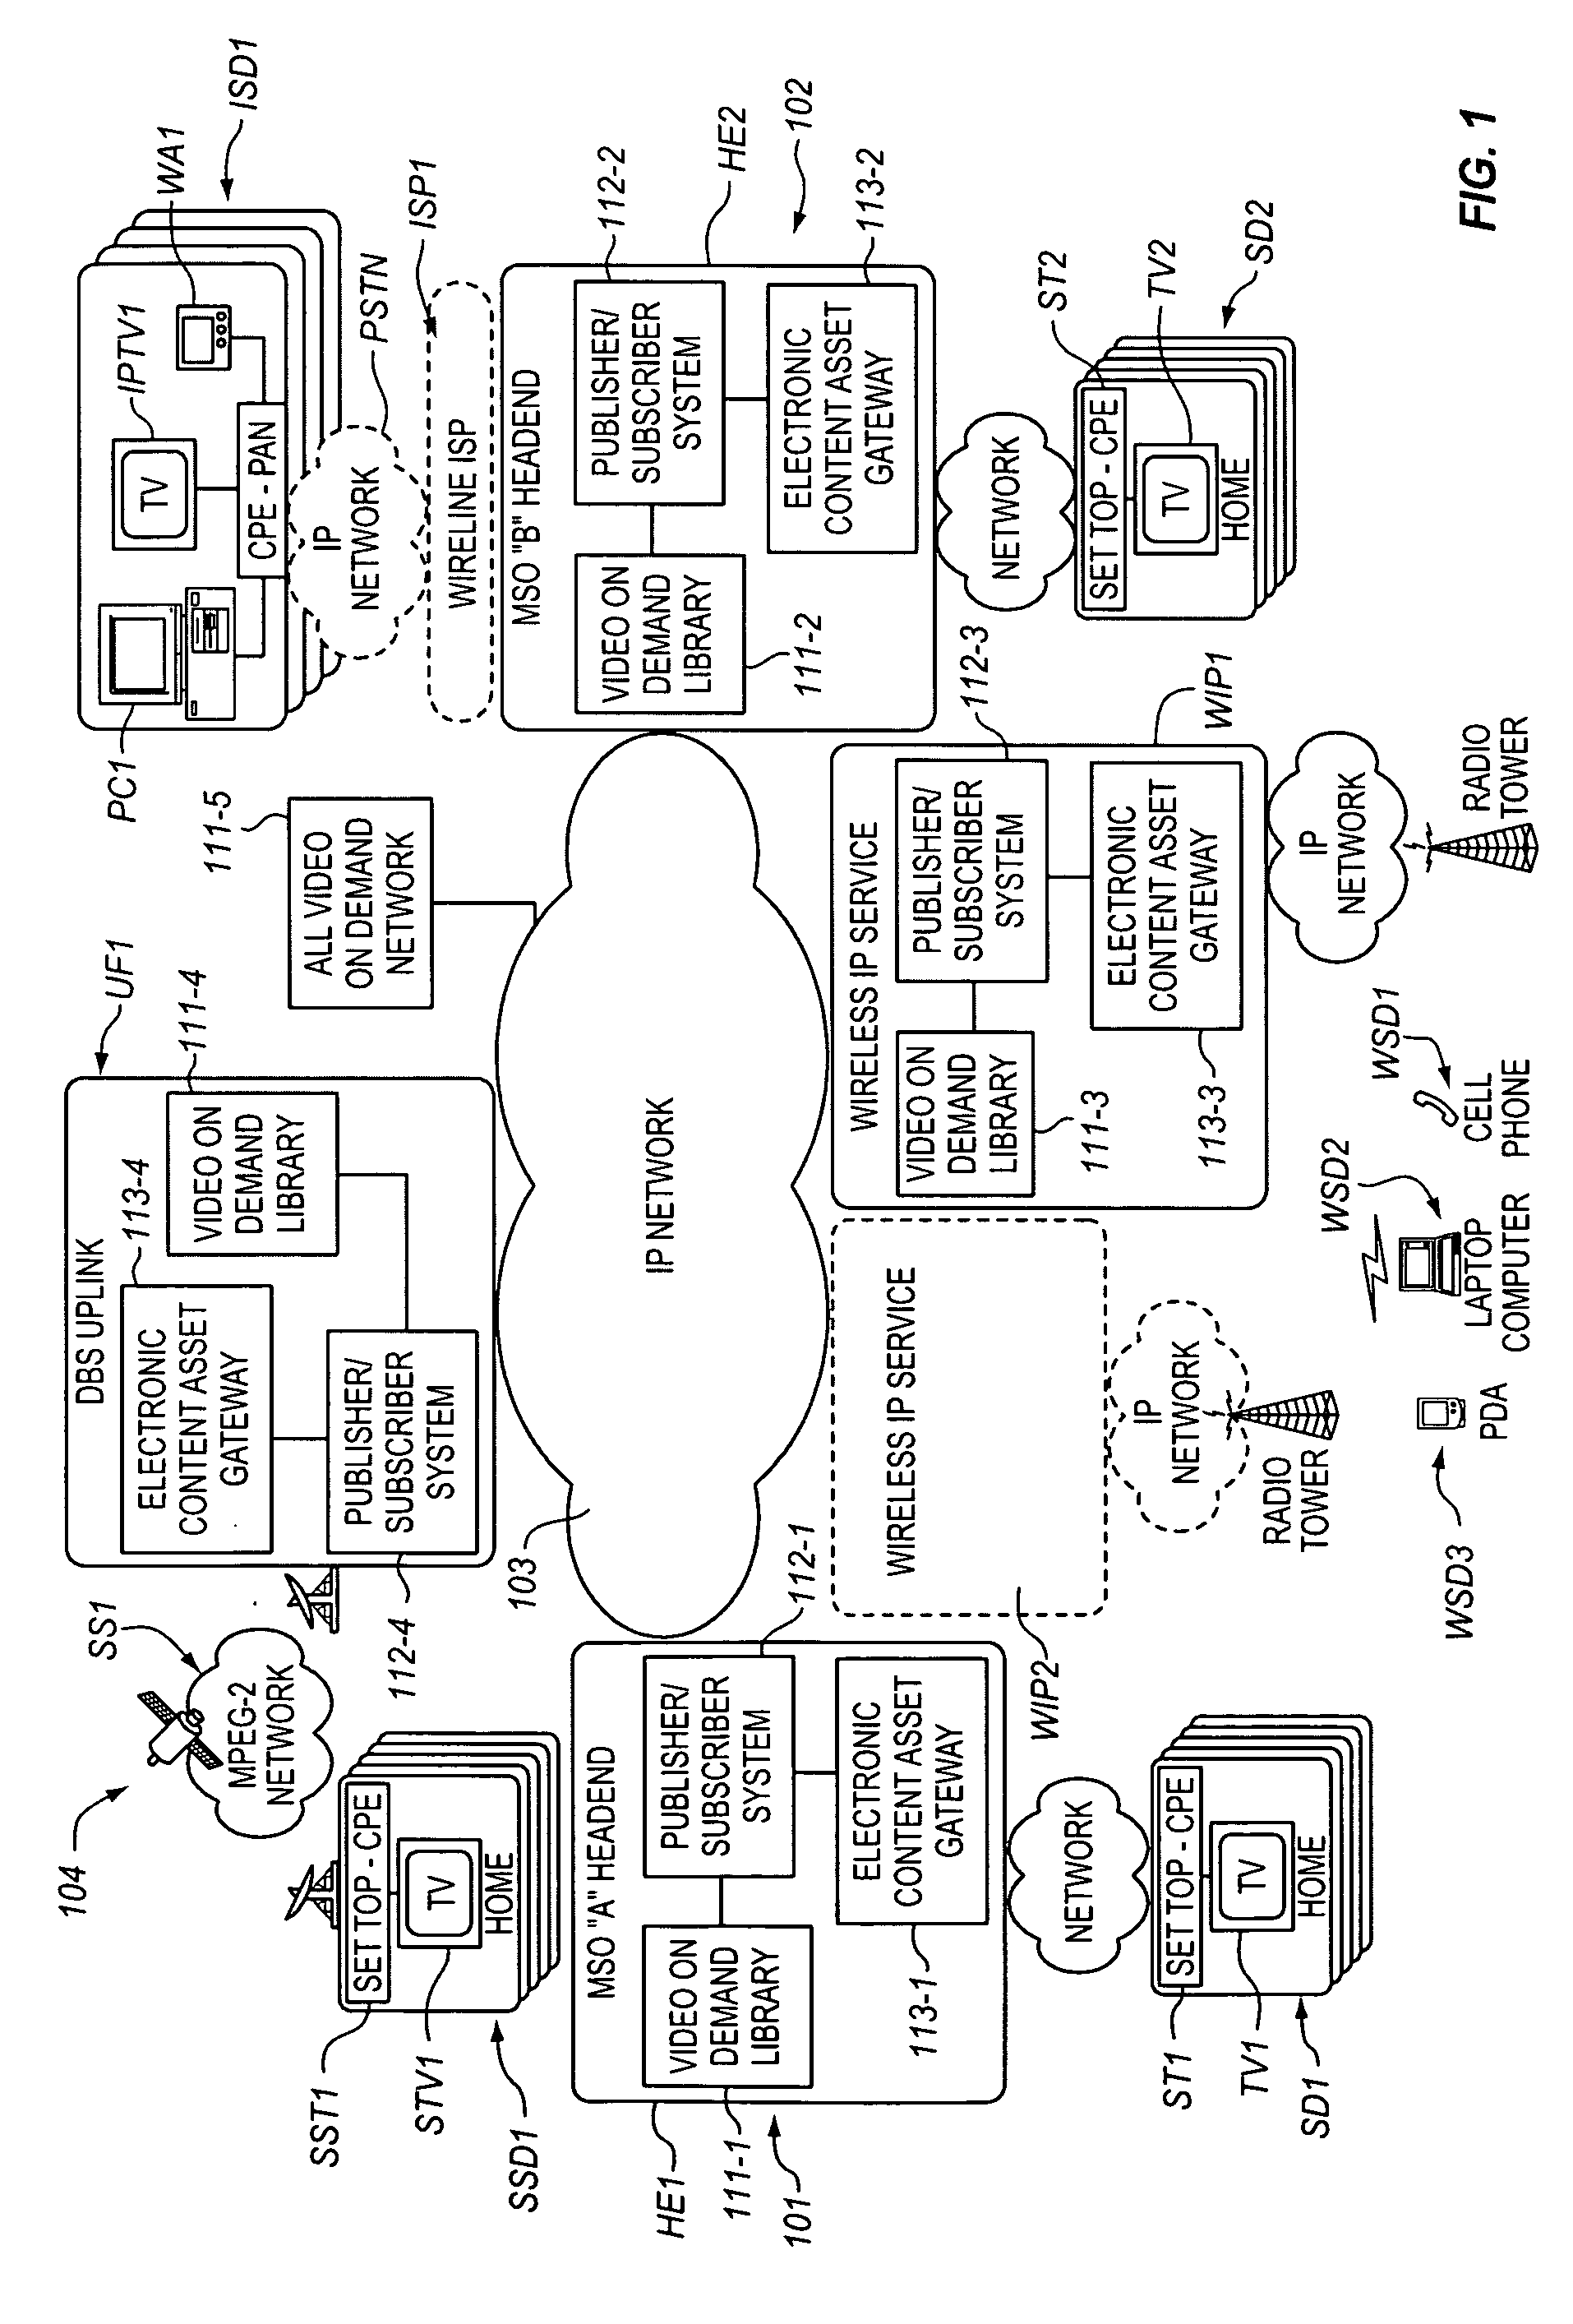 System for distributing electronic content assets over communication media having differing characteristics